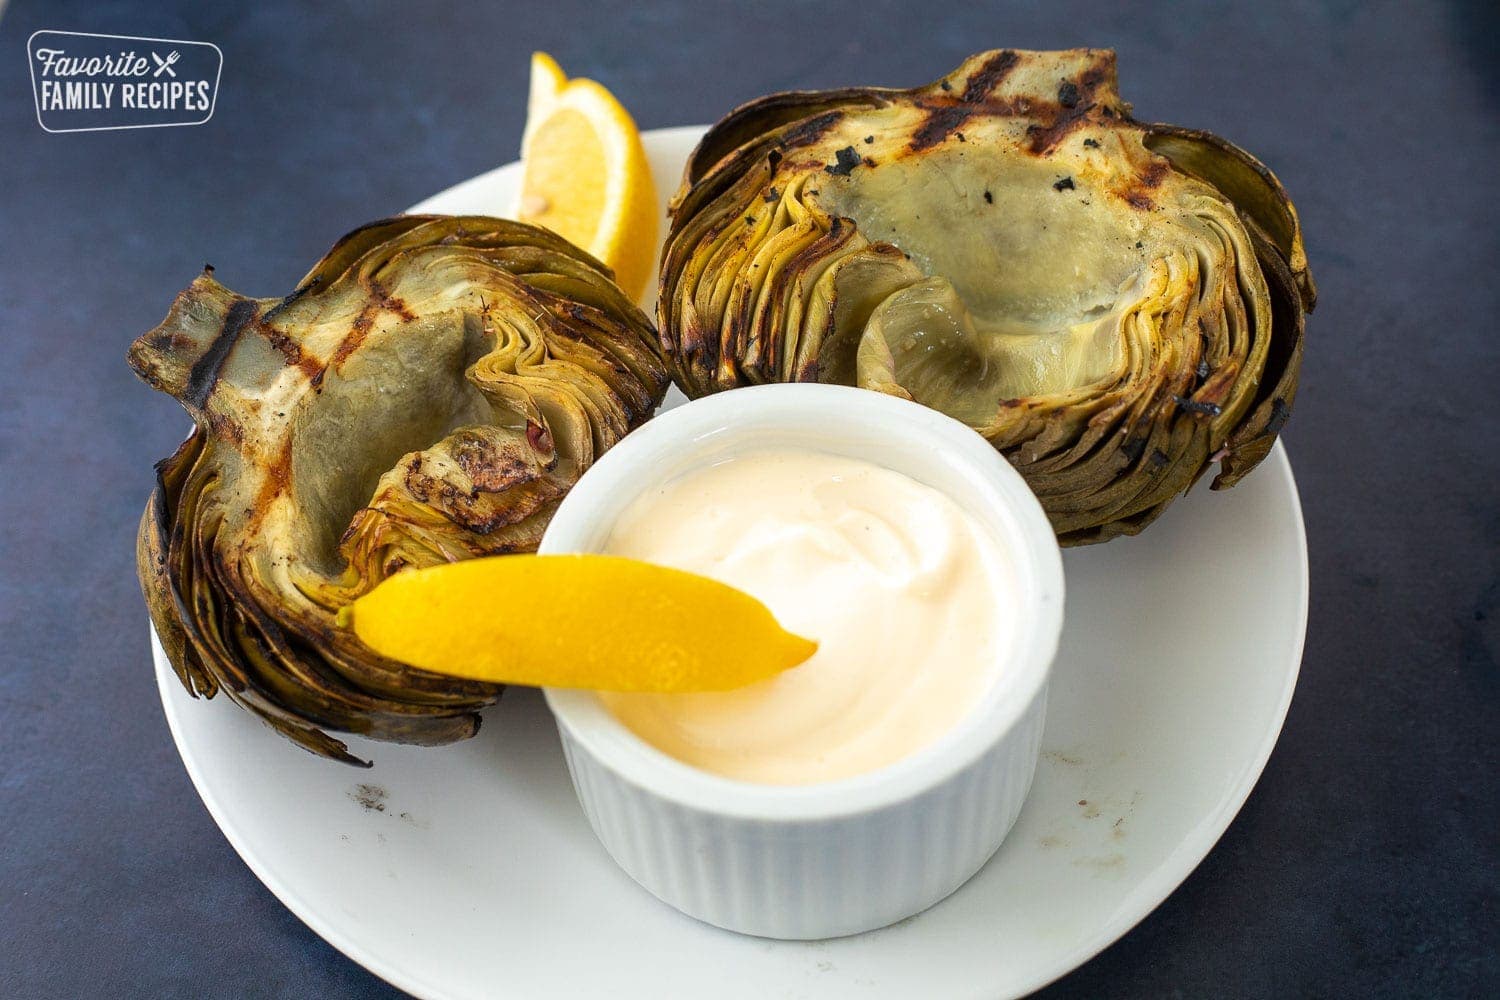 A plate with two grilled artichokes and lemon dip in the center